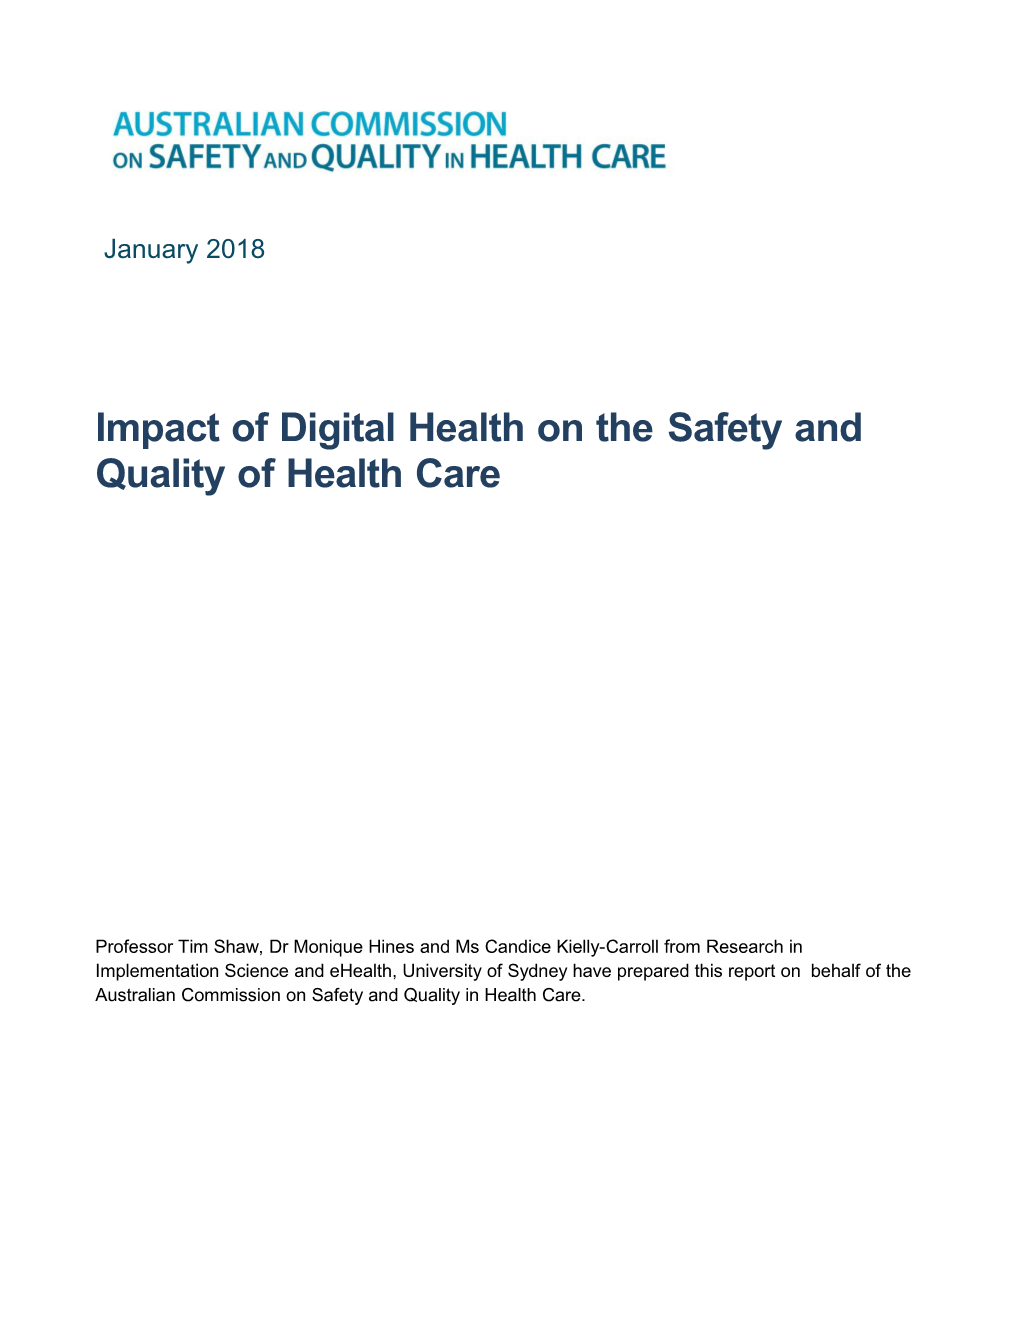 The Impact of Digital Health on Safety and Quality of Healthcare